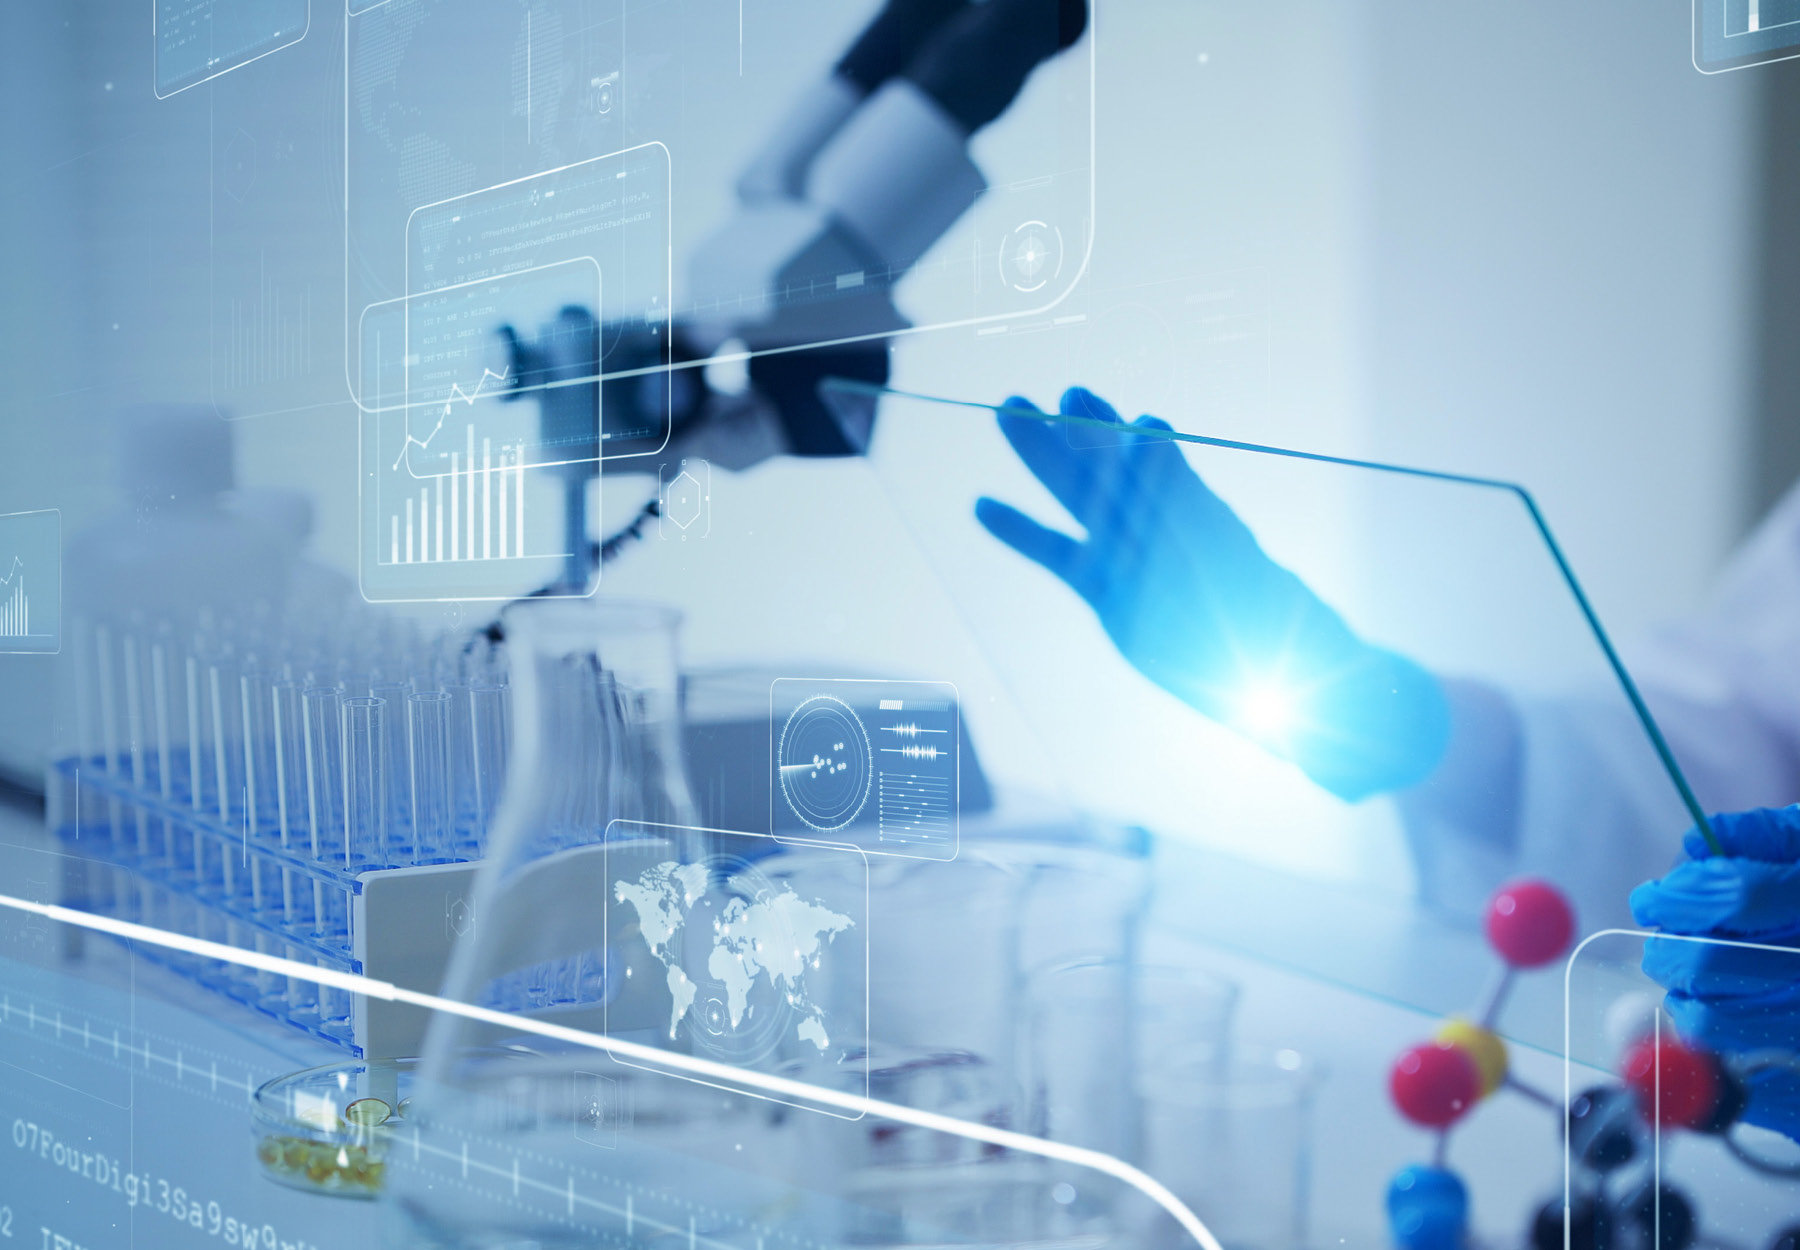 Science technology concept image. Scientist at bench with microscope and other laboratory equipment. Stock image.